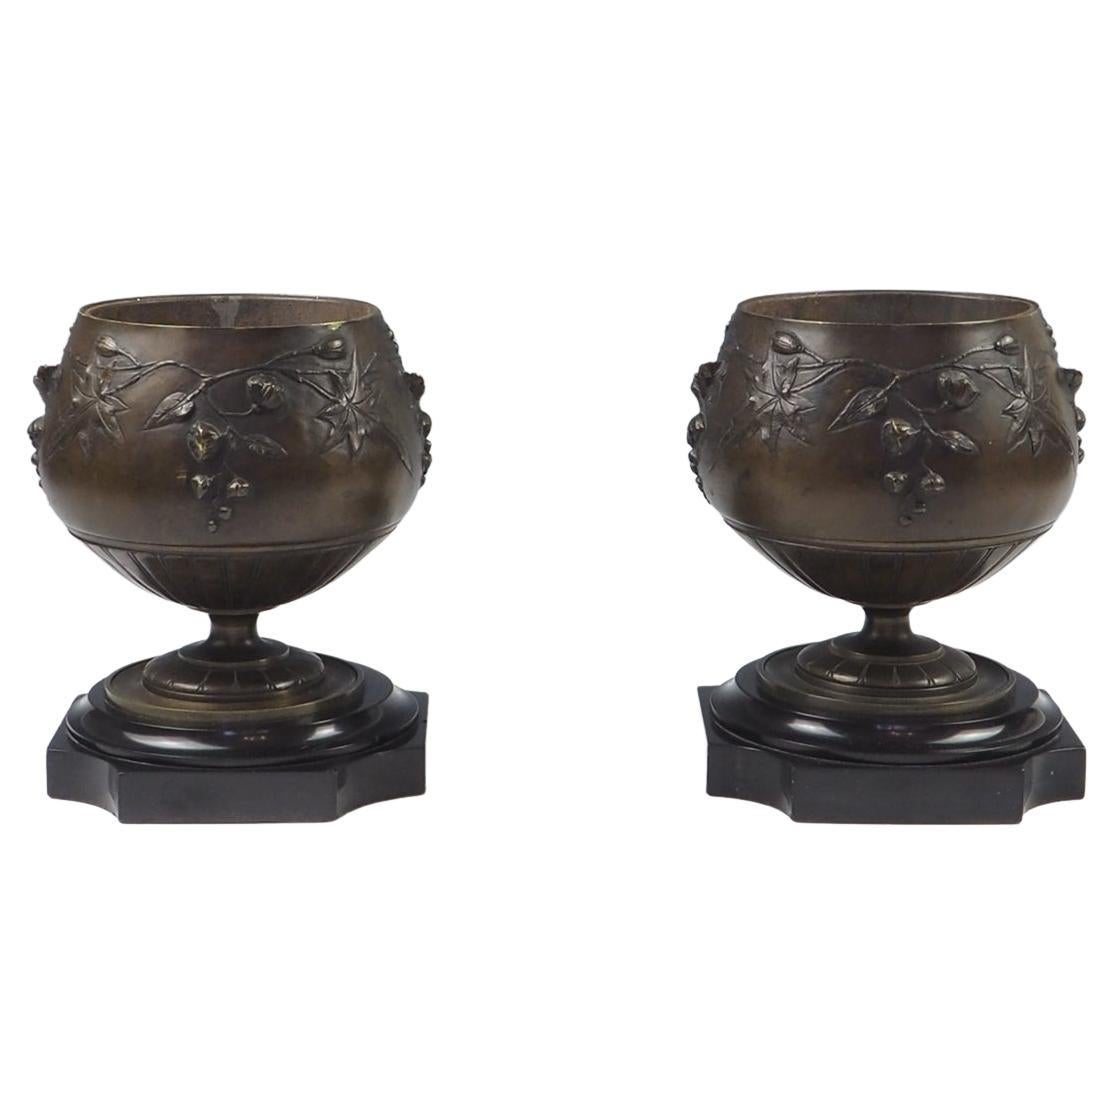 Pair of 19th Century Bronze and Marble Table Top Planters / Urns For Sale